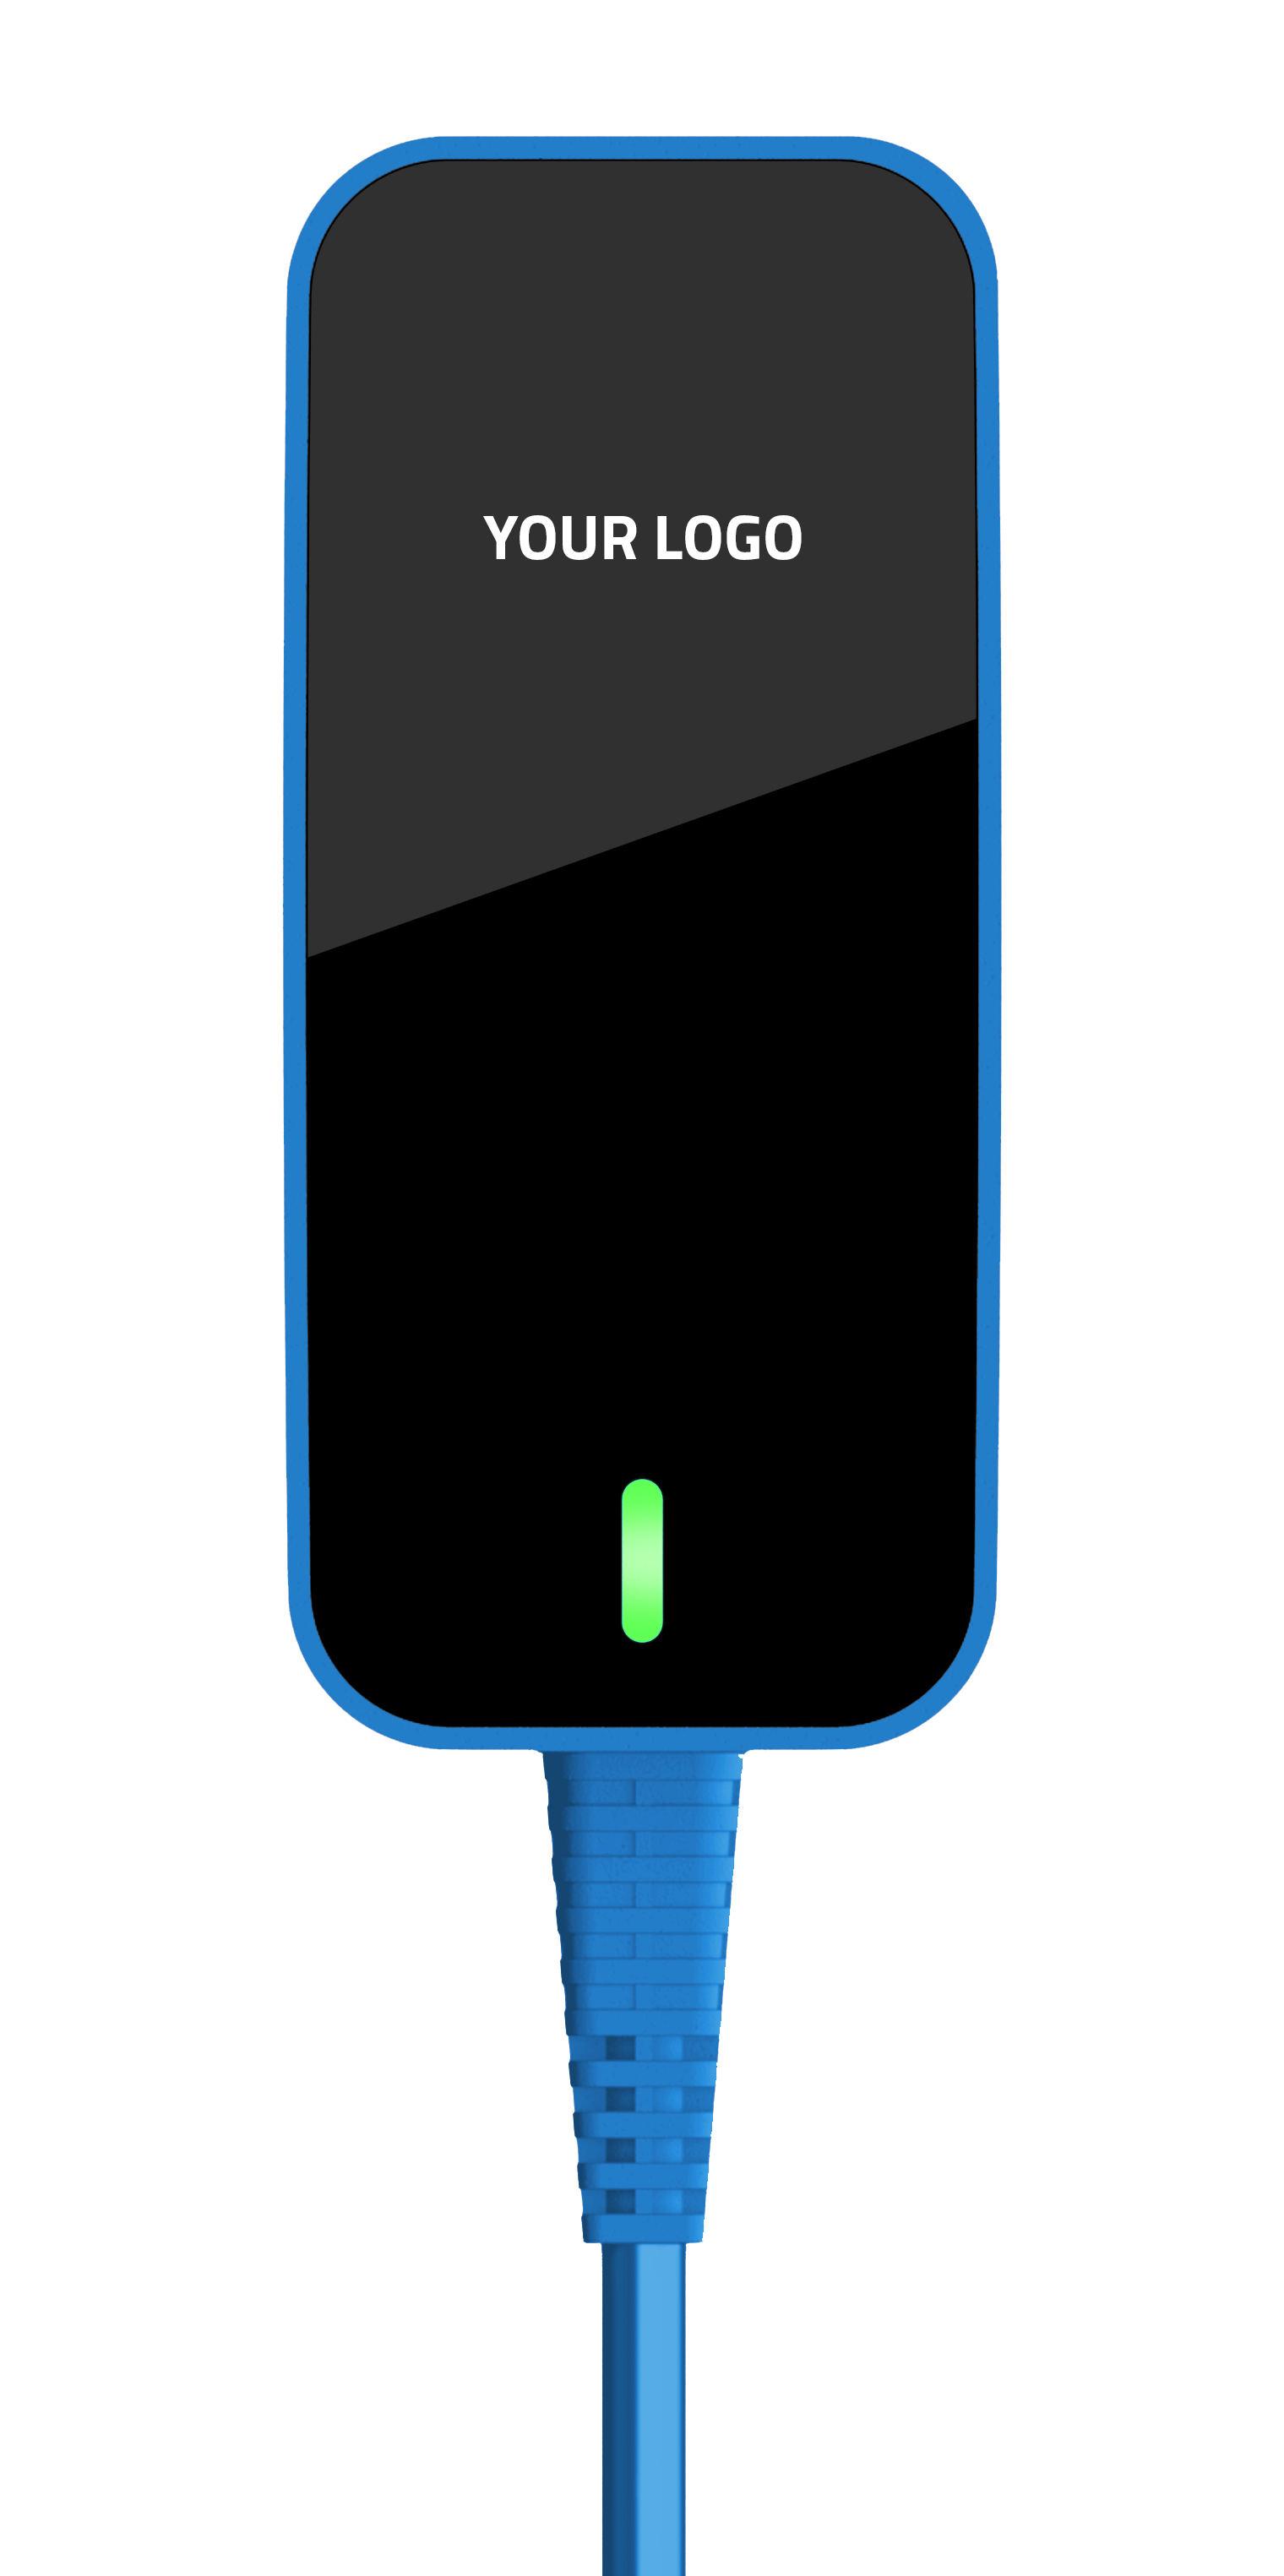 A black power supply charger with a green light on it and blue trim.